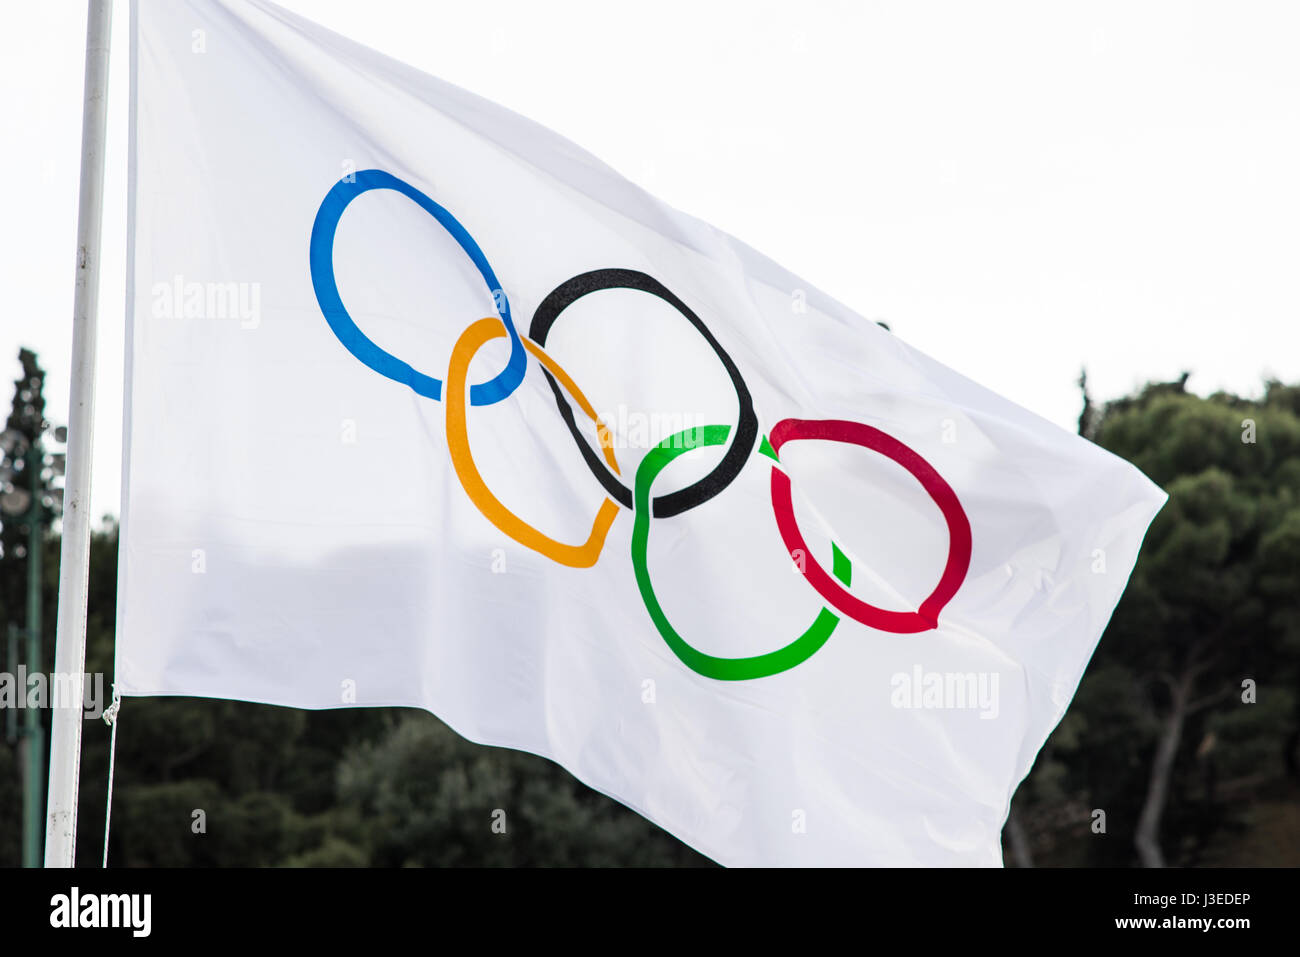 Detail Images Of Olympic Flag Nomer 35